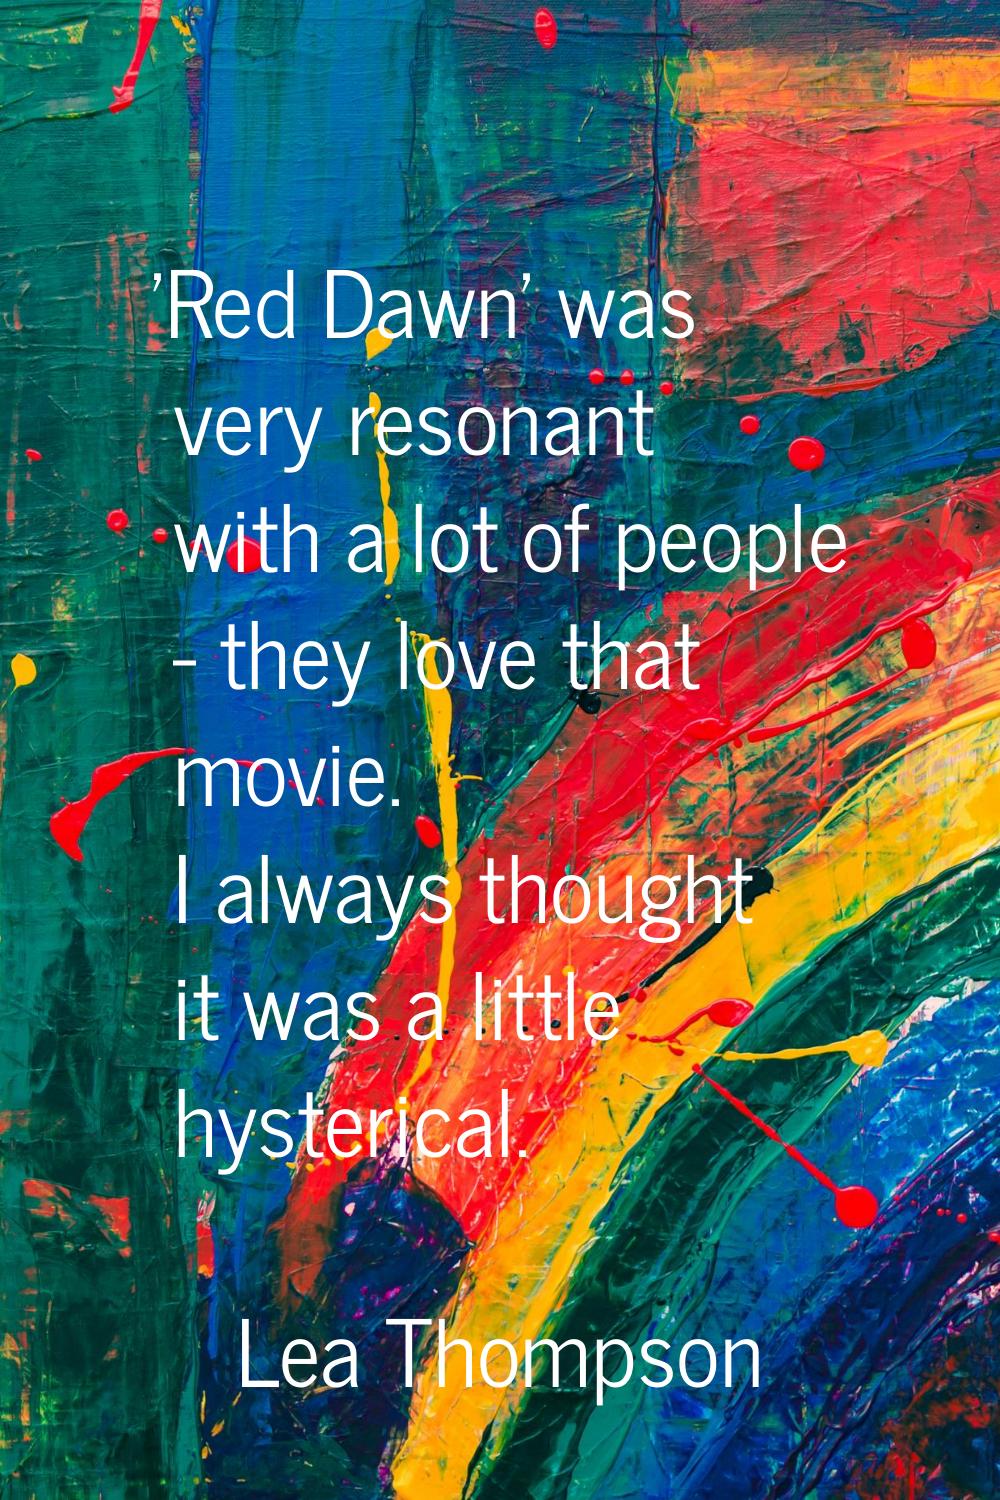 'Red Dawn' was very resonant with a lot of people - they love that movie. I always thought it was a